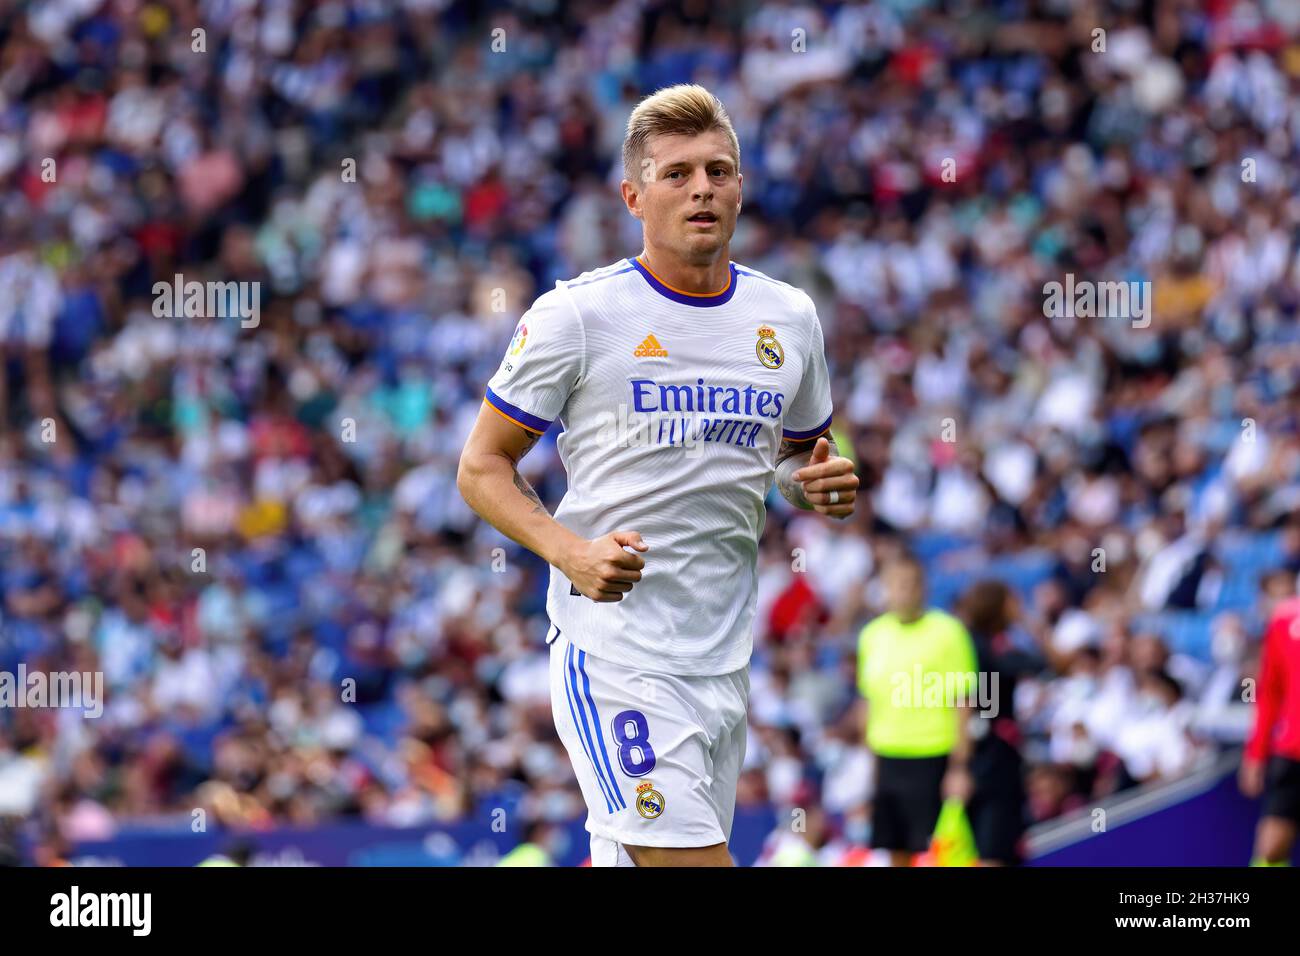 BARCELONA - OCT 3: Toni Kroos in action during the La Liga match between RCD Espanyol and Real Madrid CF at the RCDE Stadium on October 3, 2021 in Bar Stock Photo